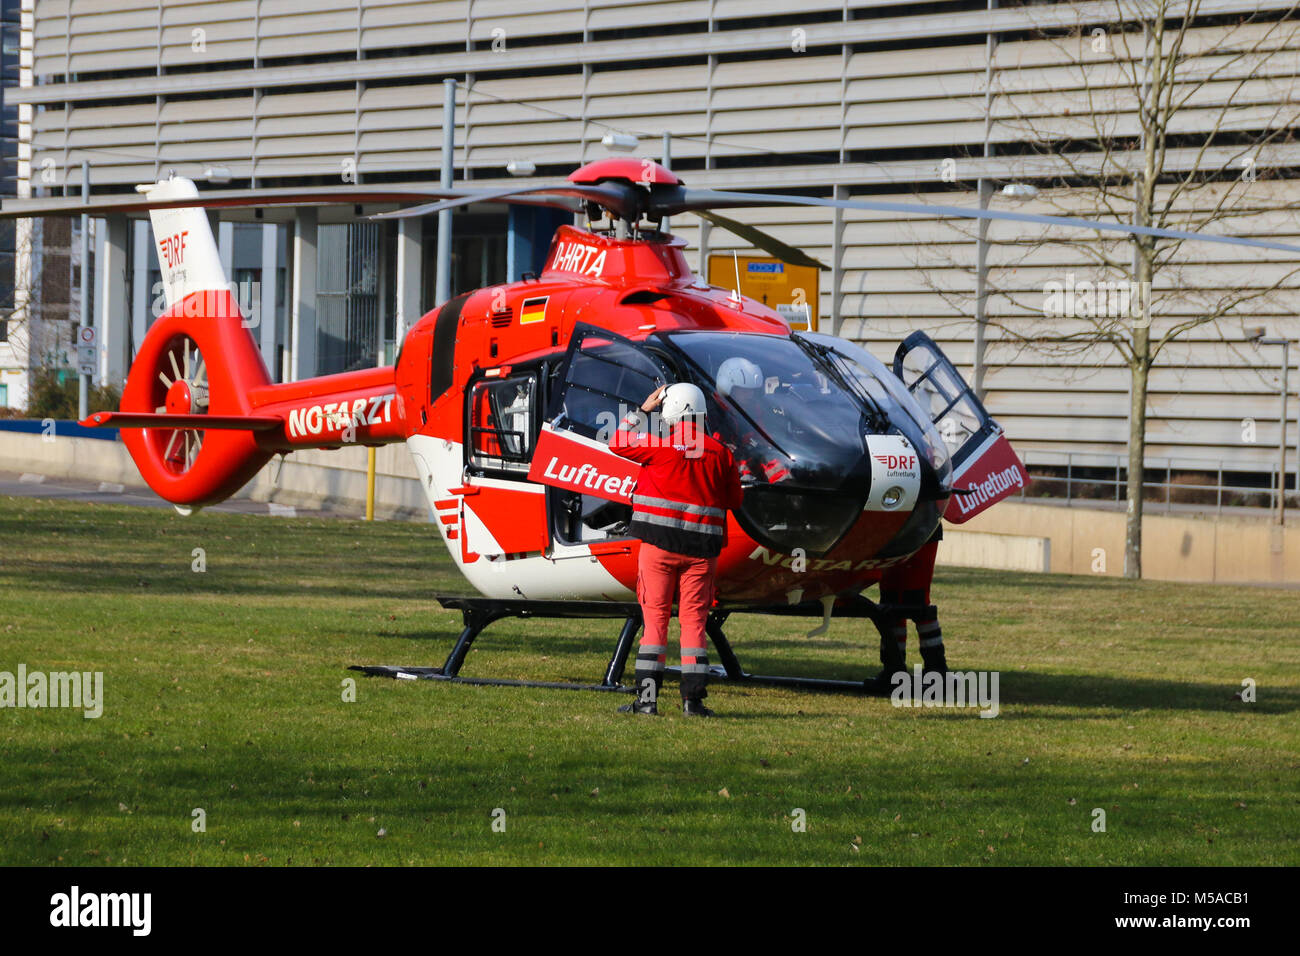 Magdeburg, Germany - 21 February 2018: The medical team and the pilot of the rescue helicopter Christoph 36 of the Magdeburg University Hospital are p Stock Photo